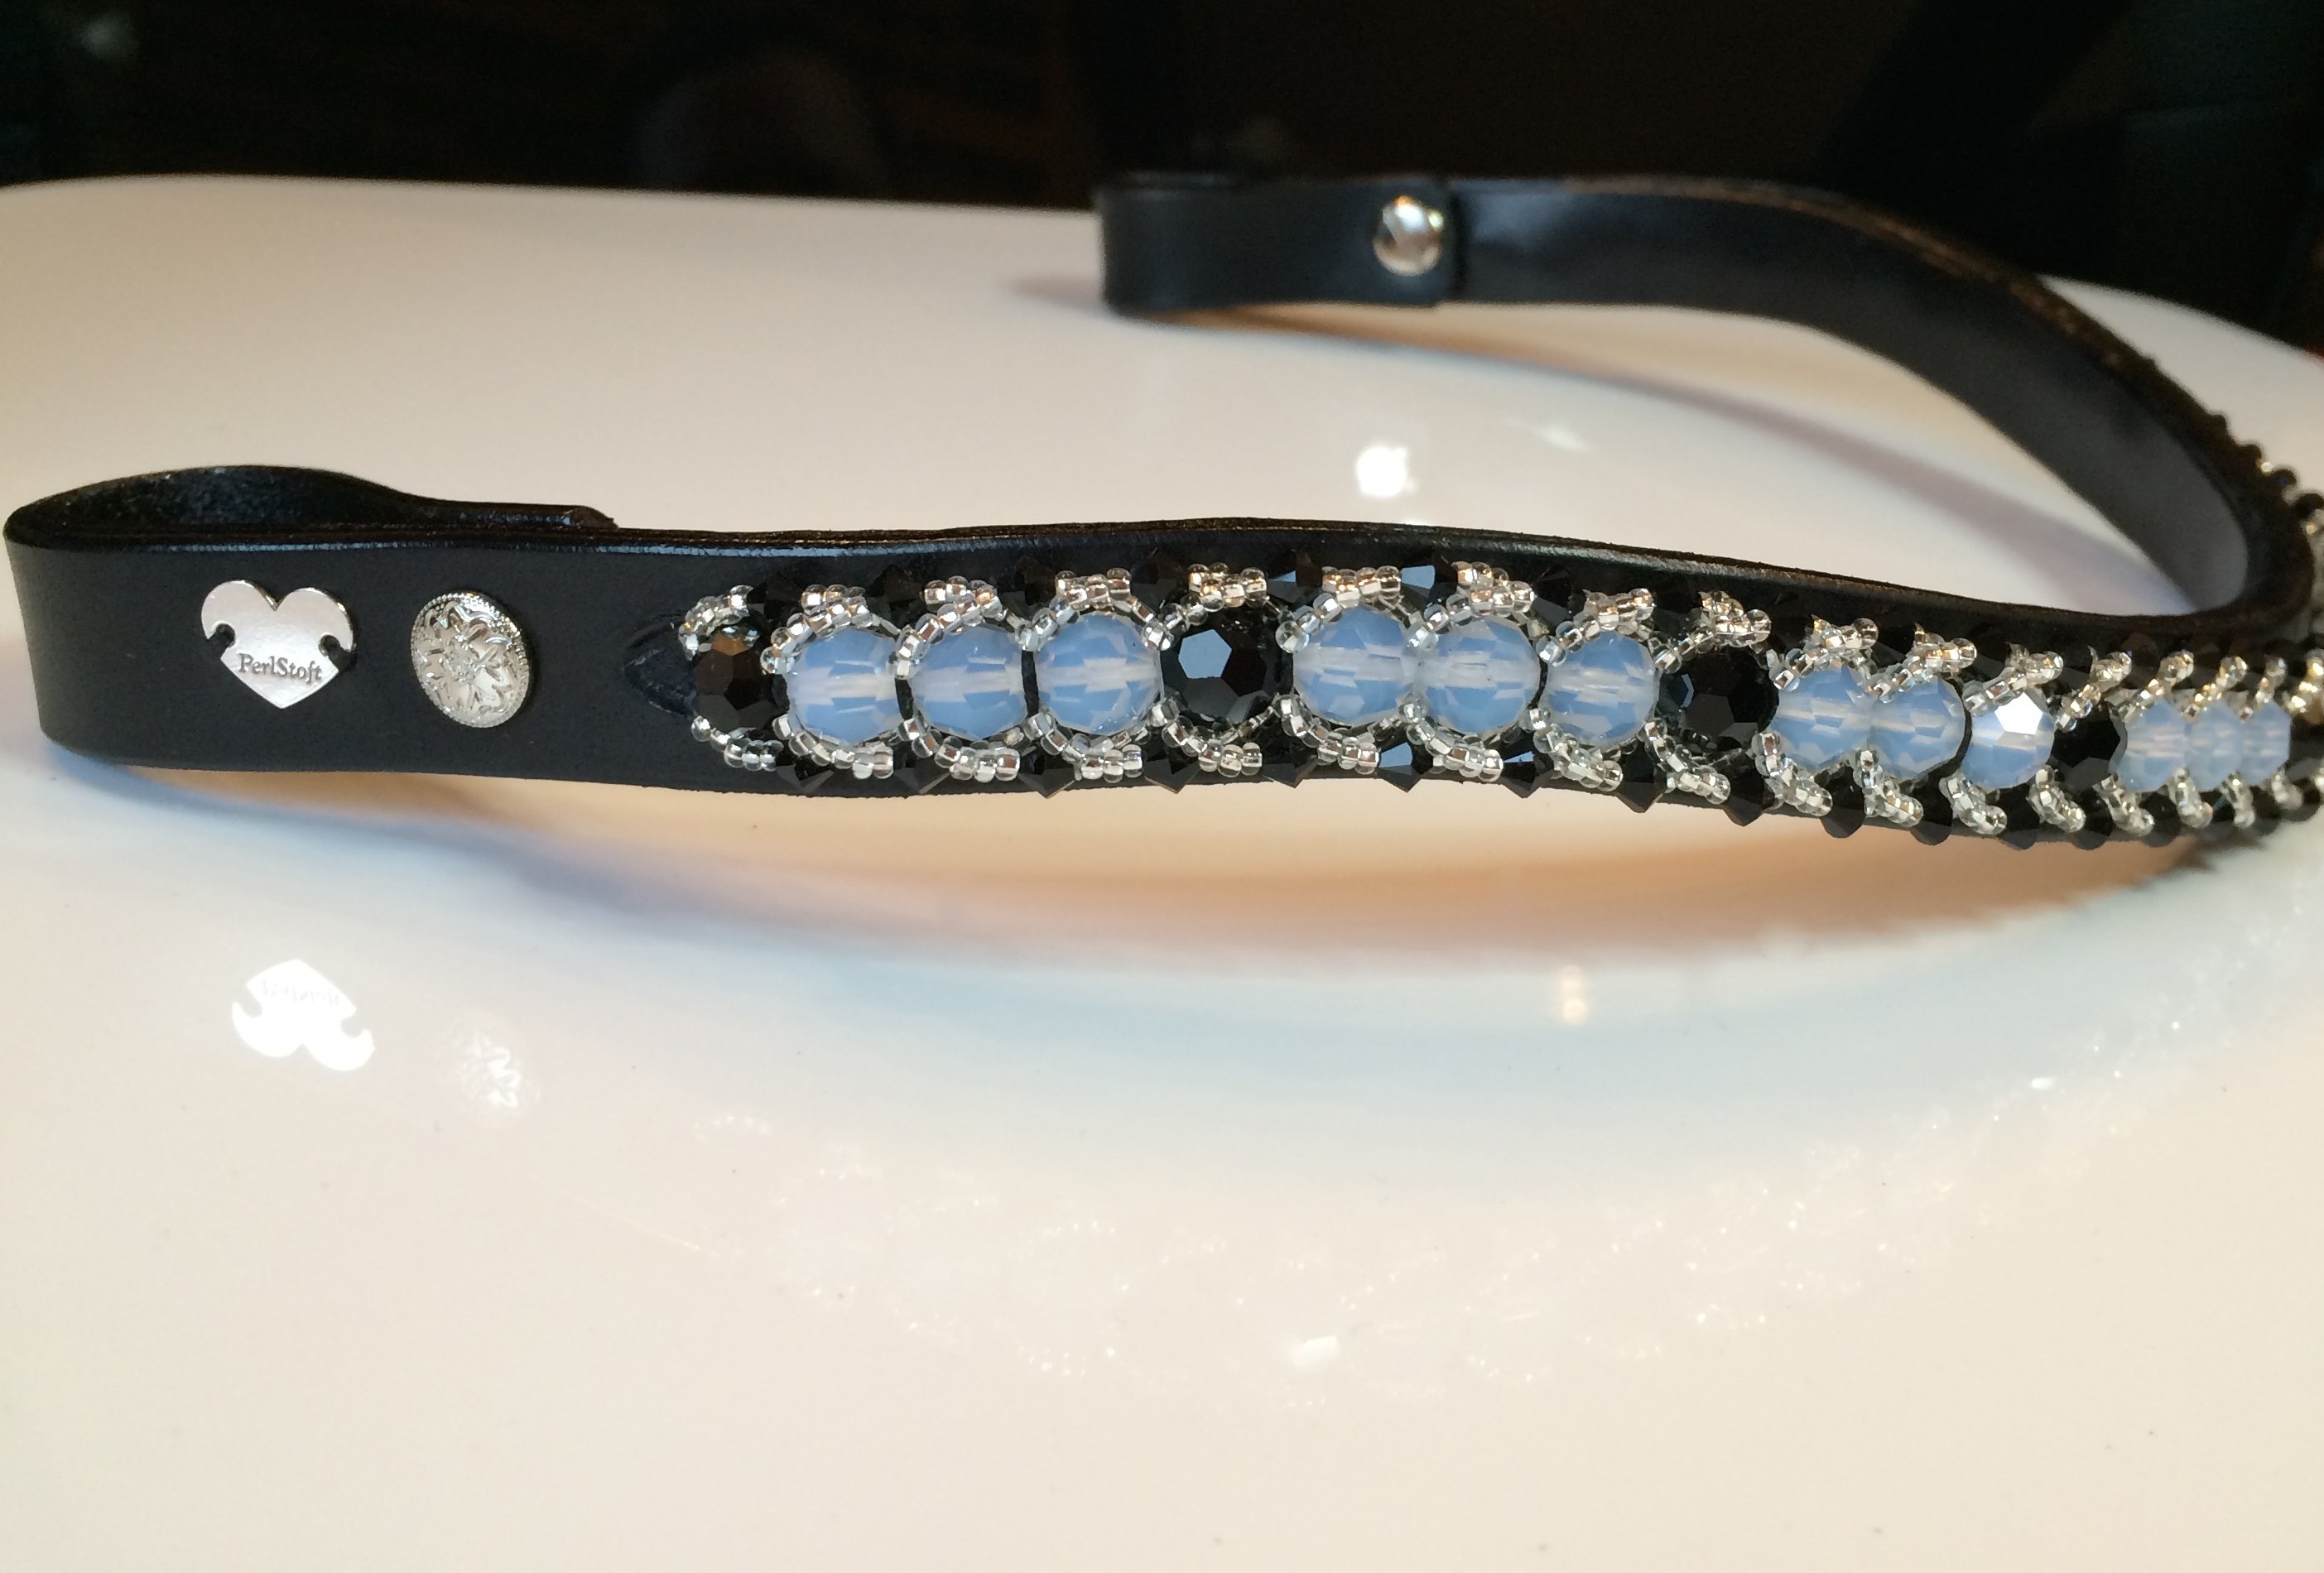 Passion Browband #13